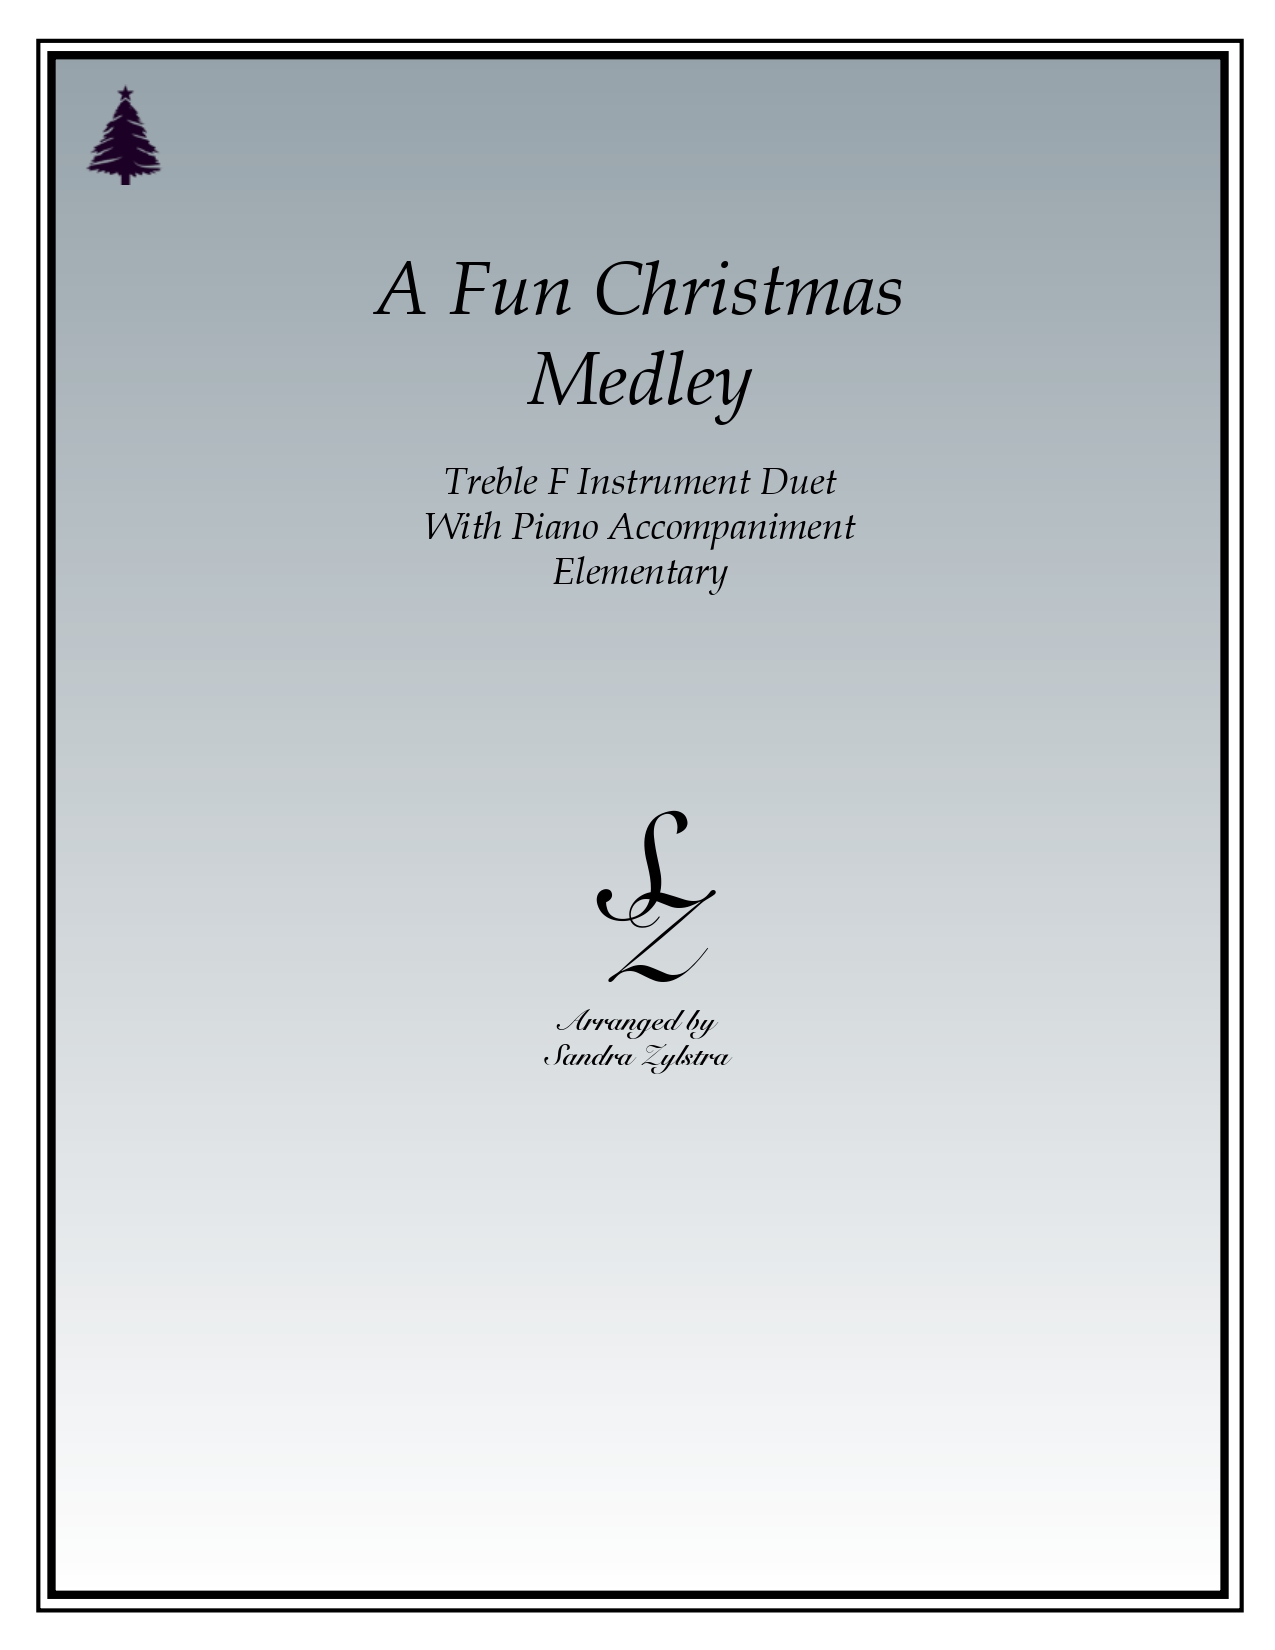 A Fun Christmas Medley F instrument duet parts cover page 00011